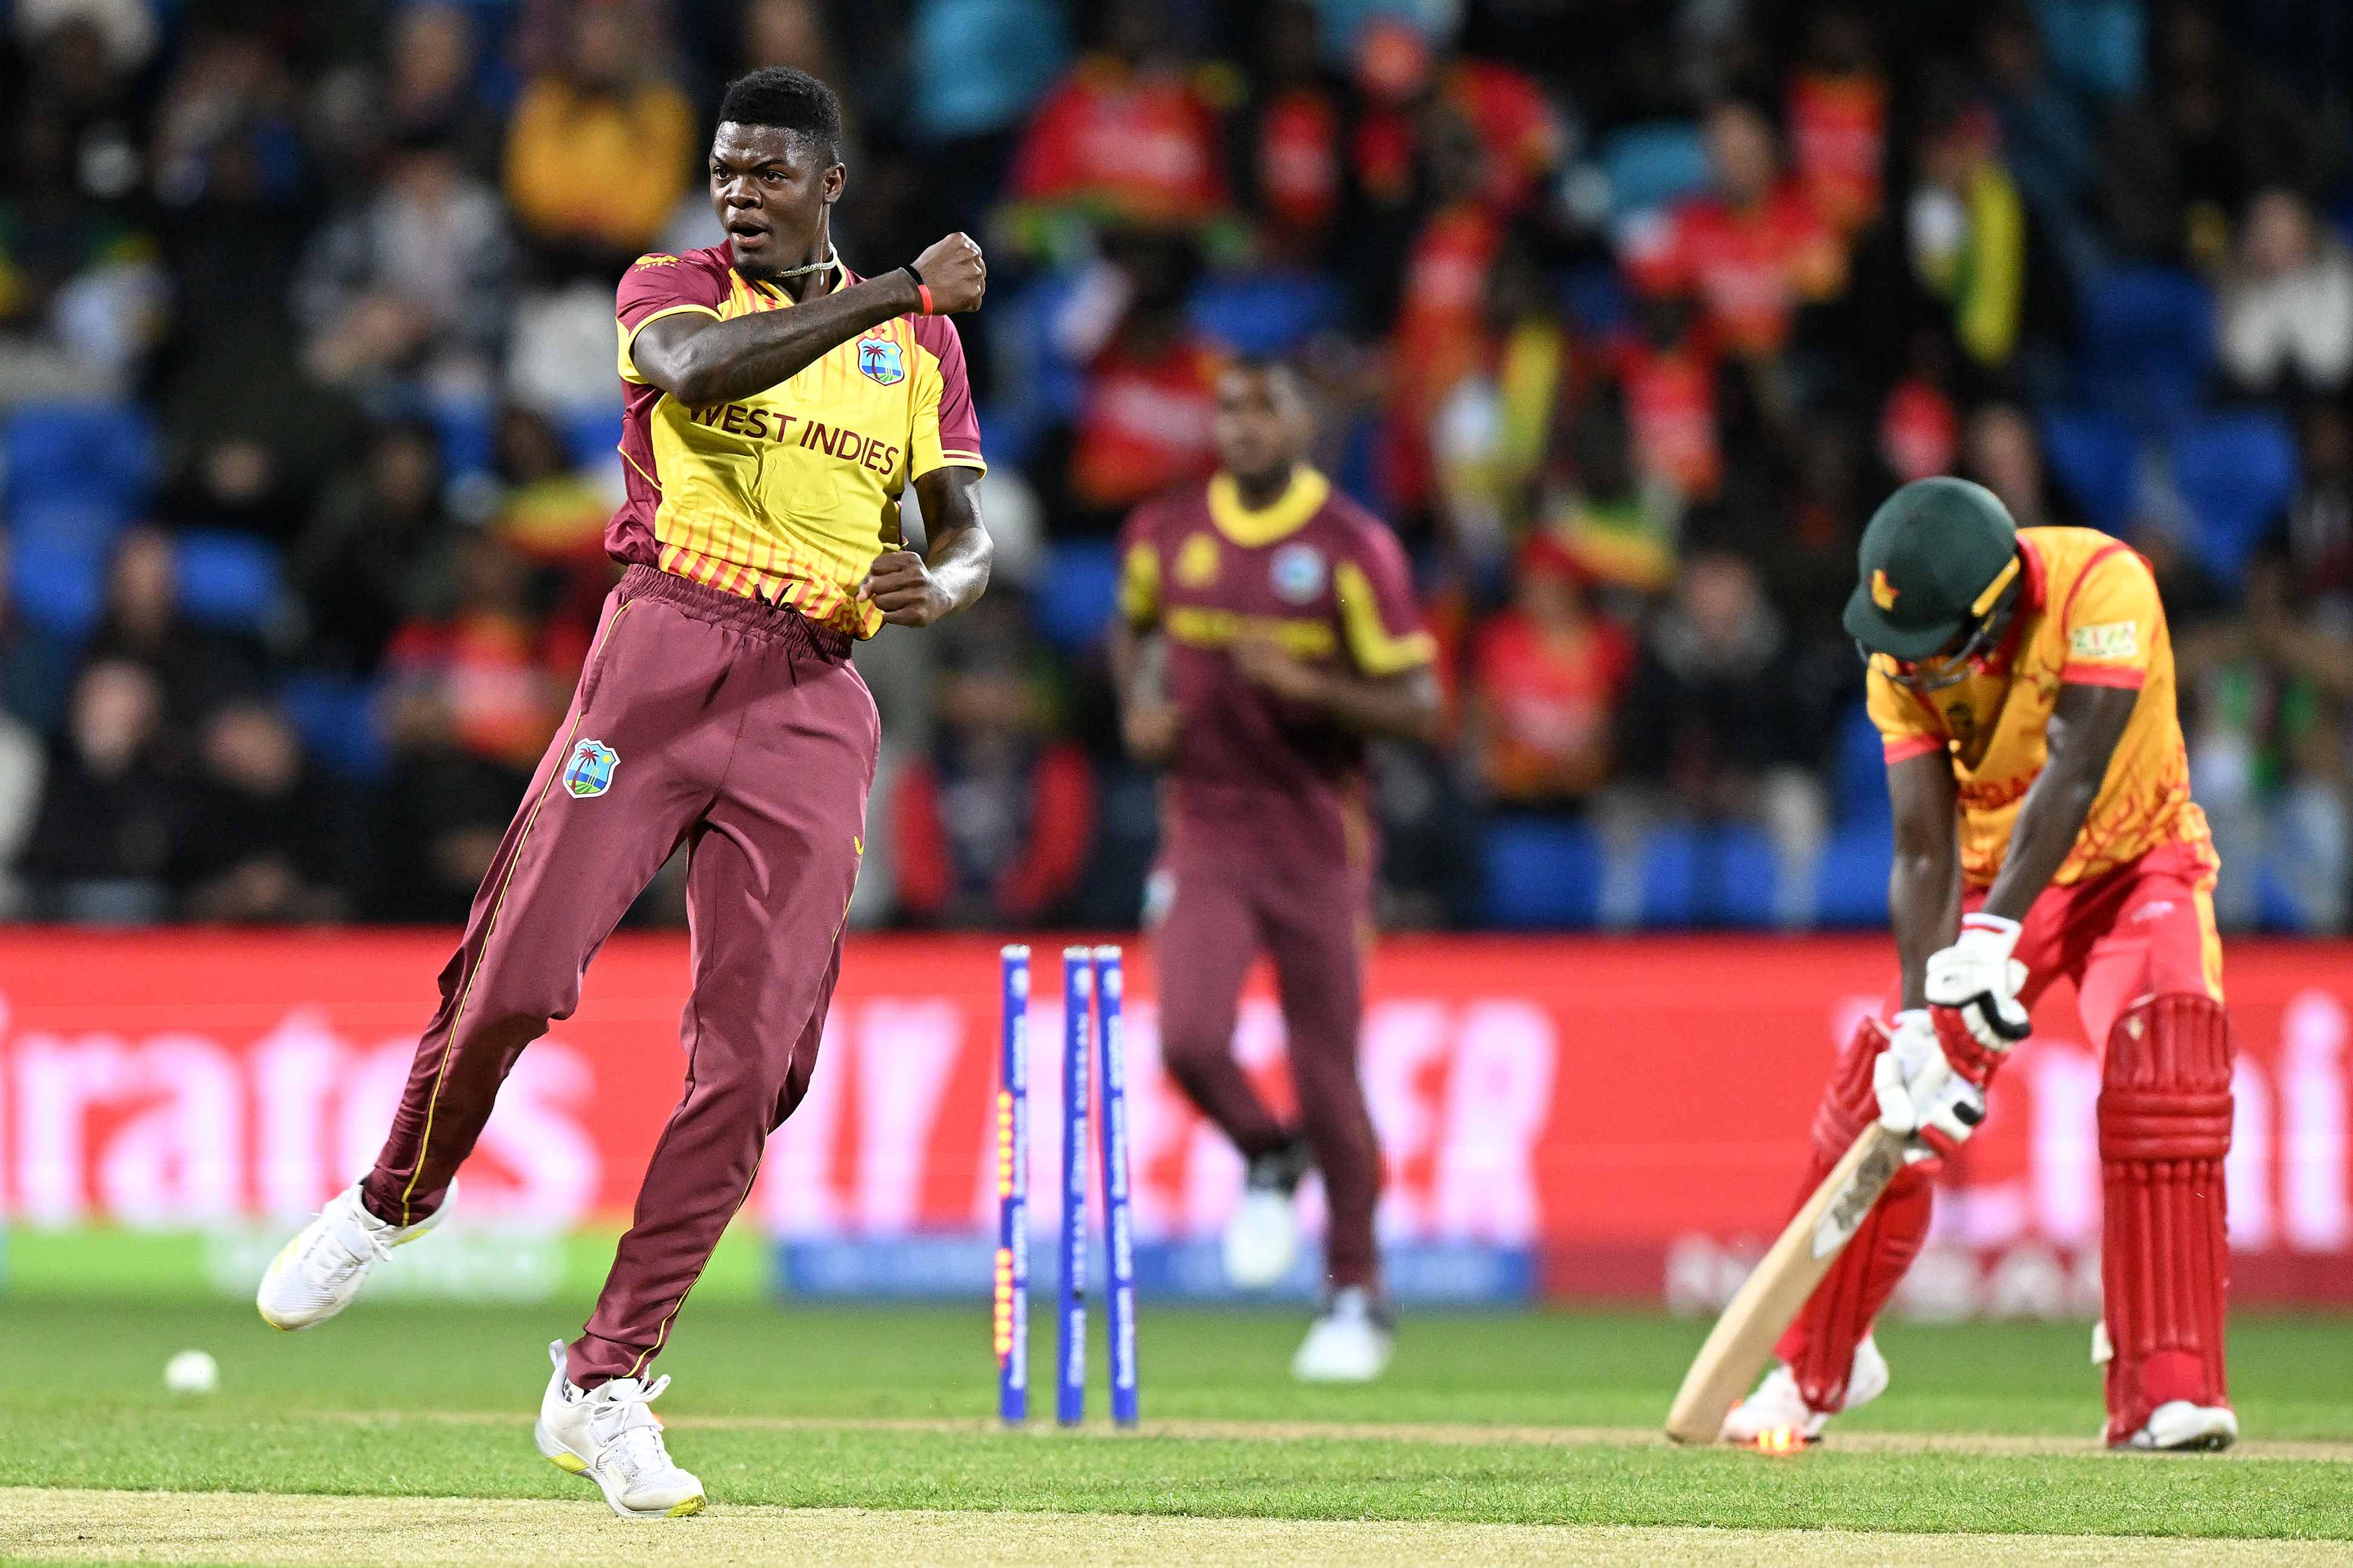 ICC World T20 | Twitter reacts as Alzarri Joseph and Jason Holder star in West Indies’ thumping 31-run win over Zimbabwe